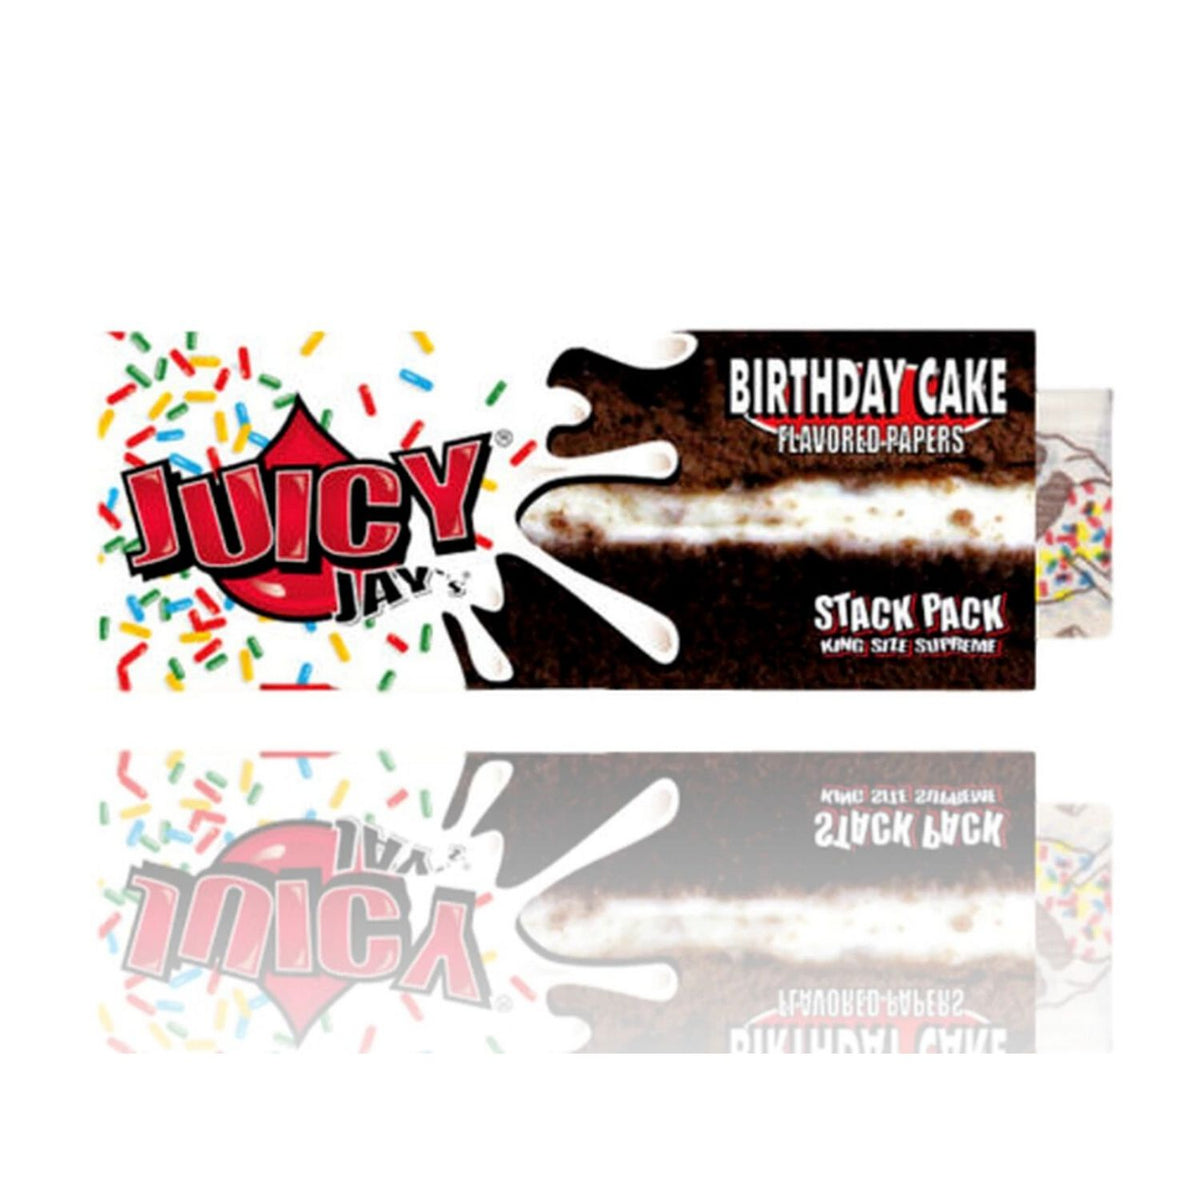 Juicy Jay Rolling Papers - Birthday Cake Flavor